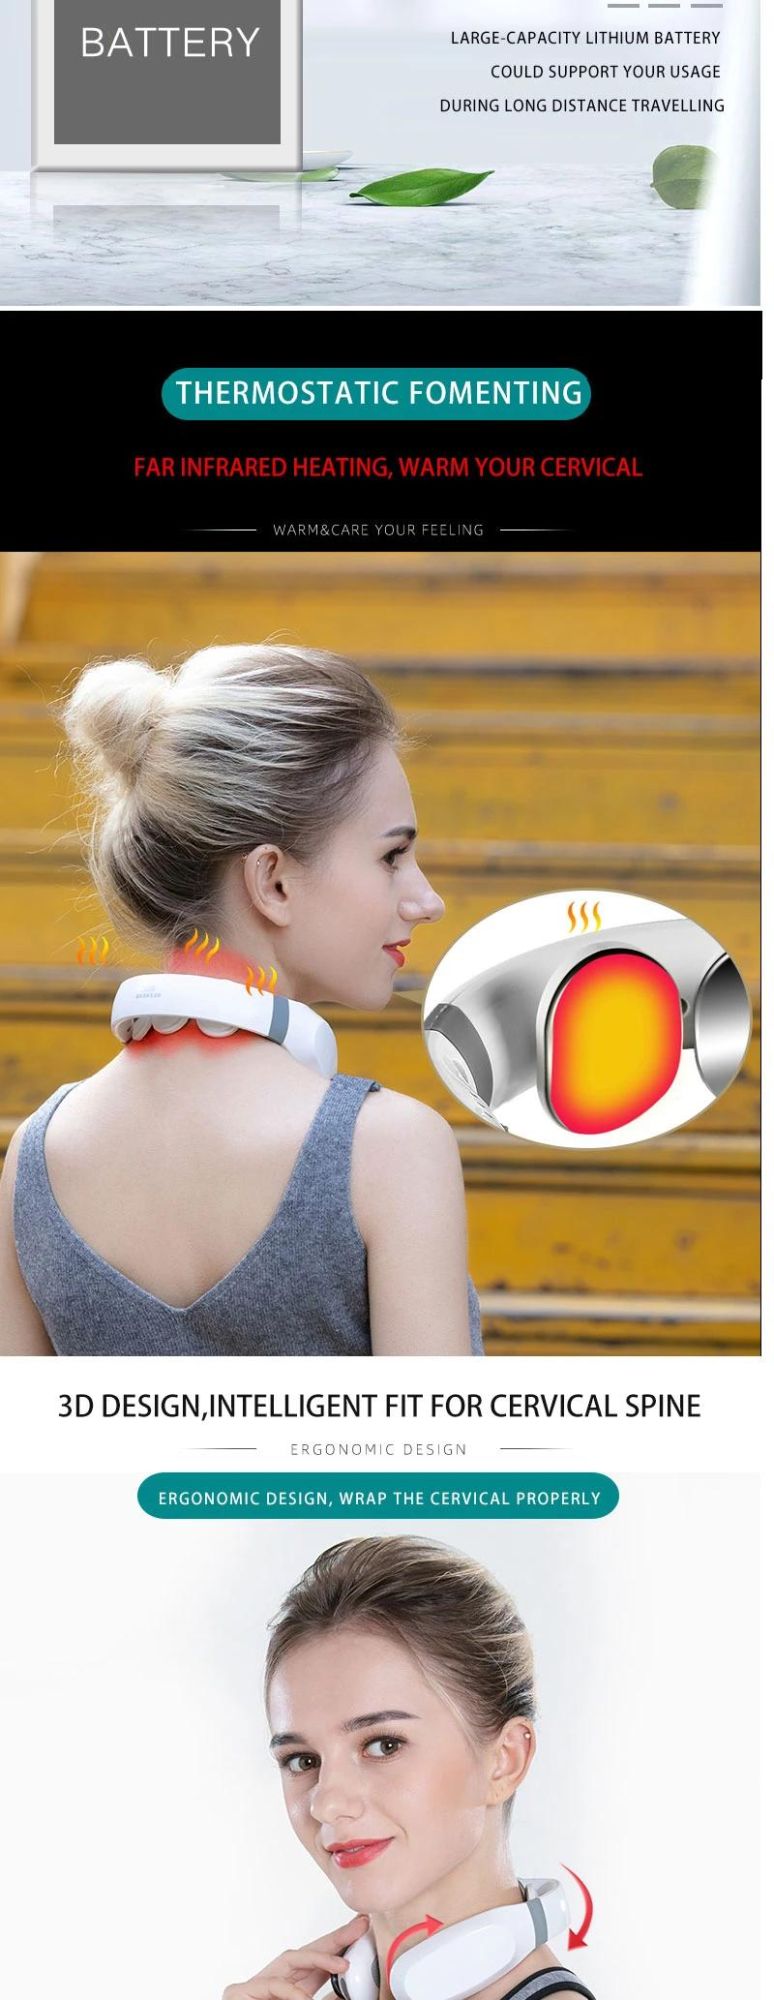 Rechargeable Electric Smart Cervical Vertebra Impulse Neck Pulse Massager Therapy Heated Neck Care Massager